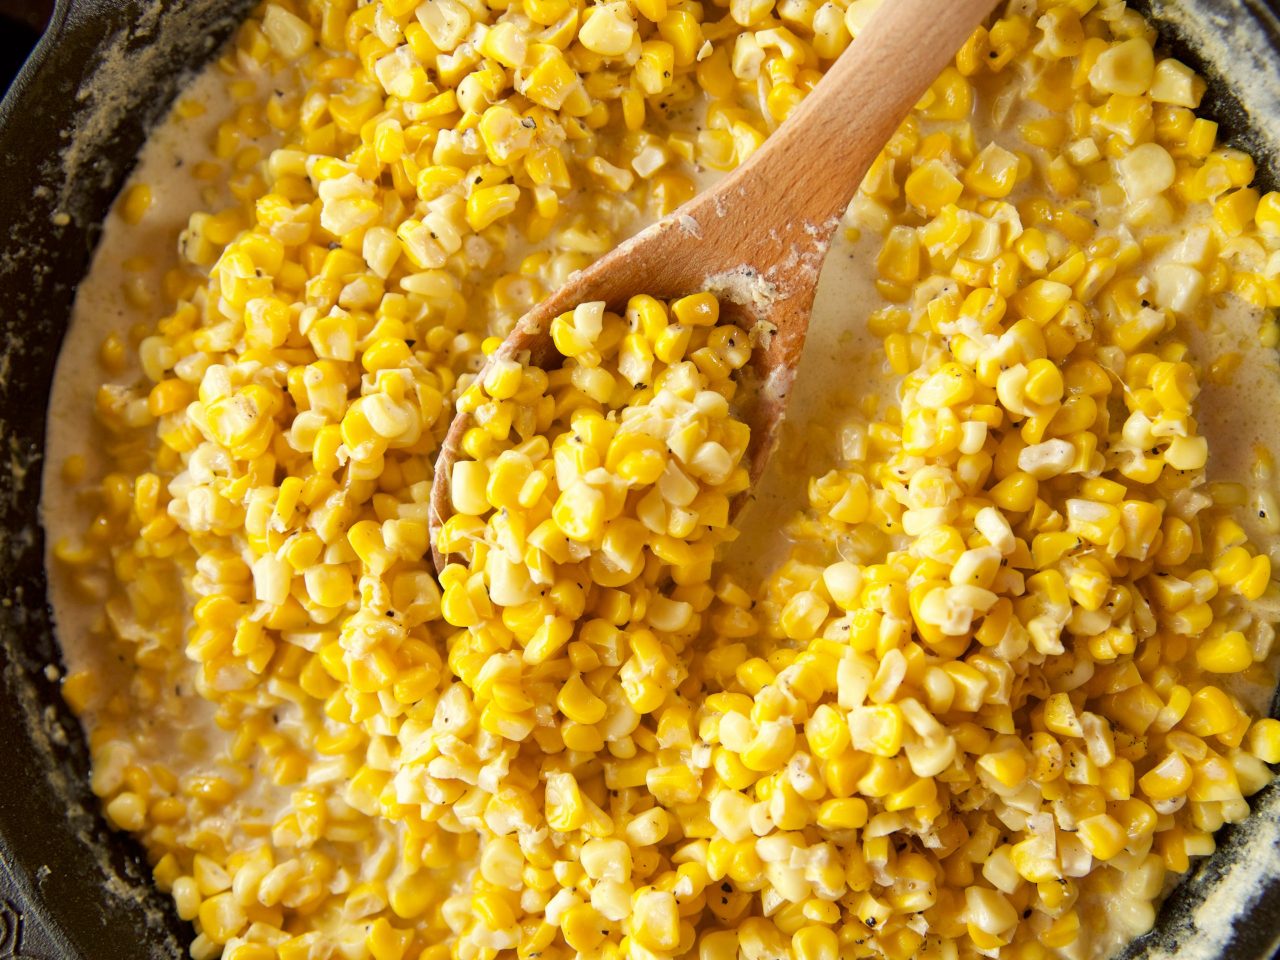 Ree Drummond's Skillet Corn Casserole, as seen on The Pioneer Woman.